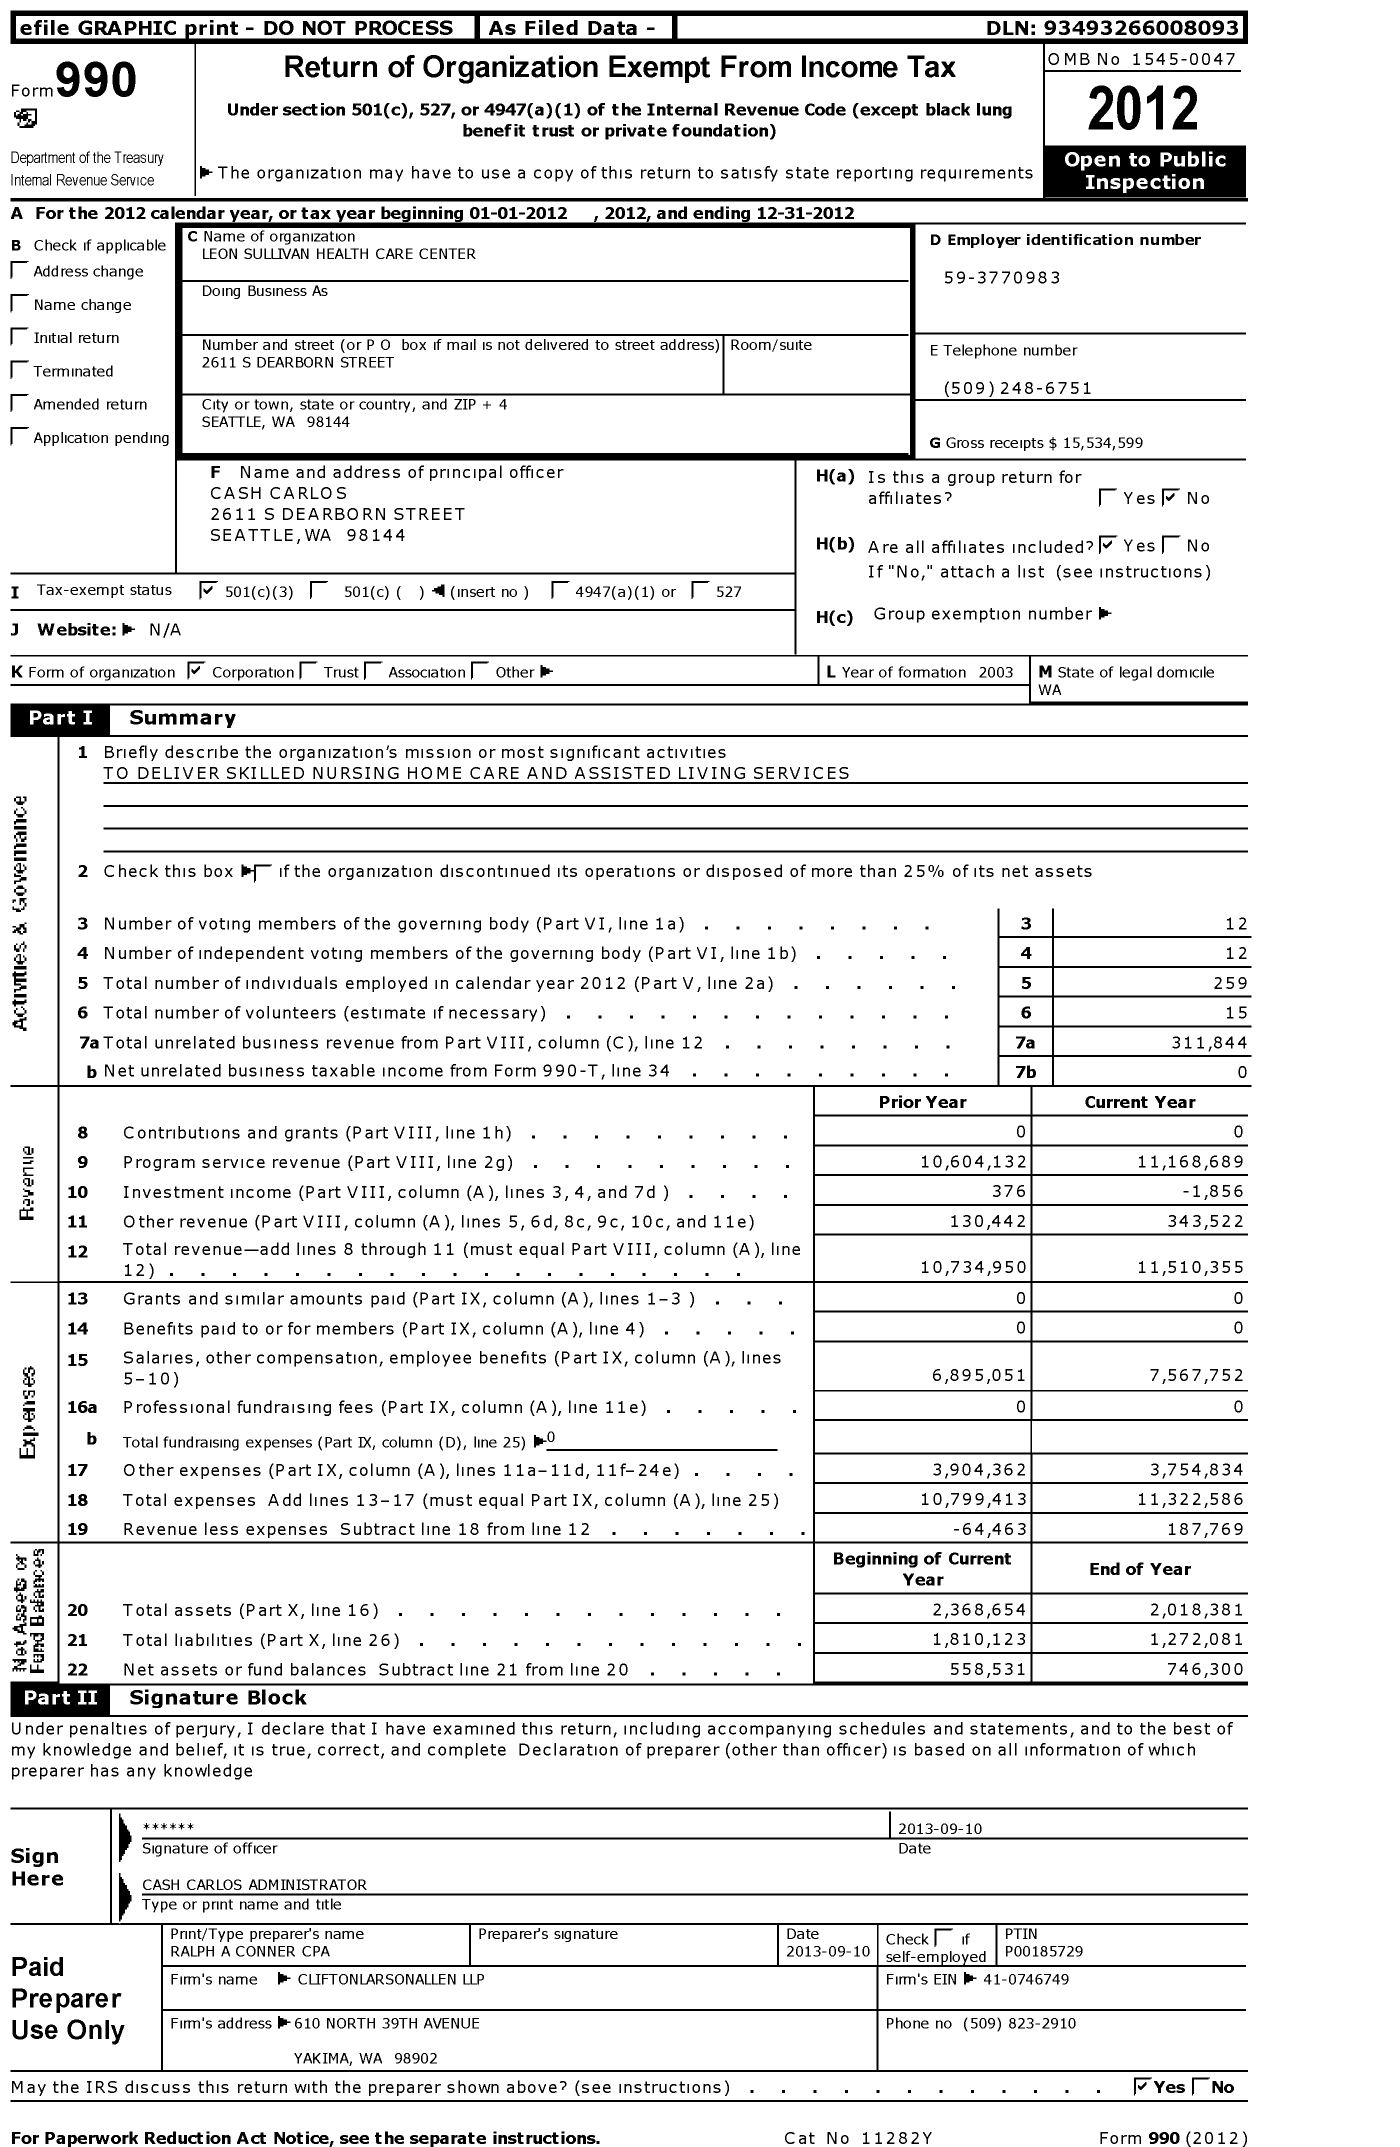 Image of first page of 2012 Form 990 for Leon Sullivan Health Care Center